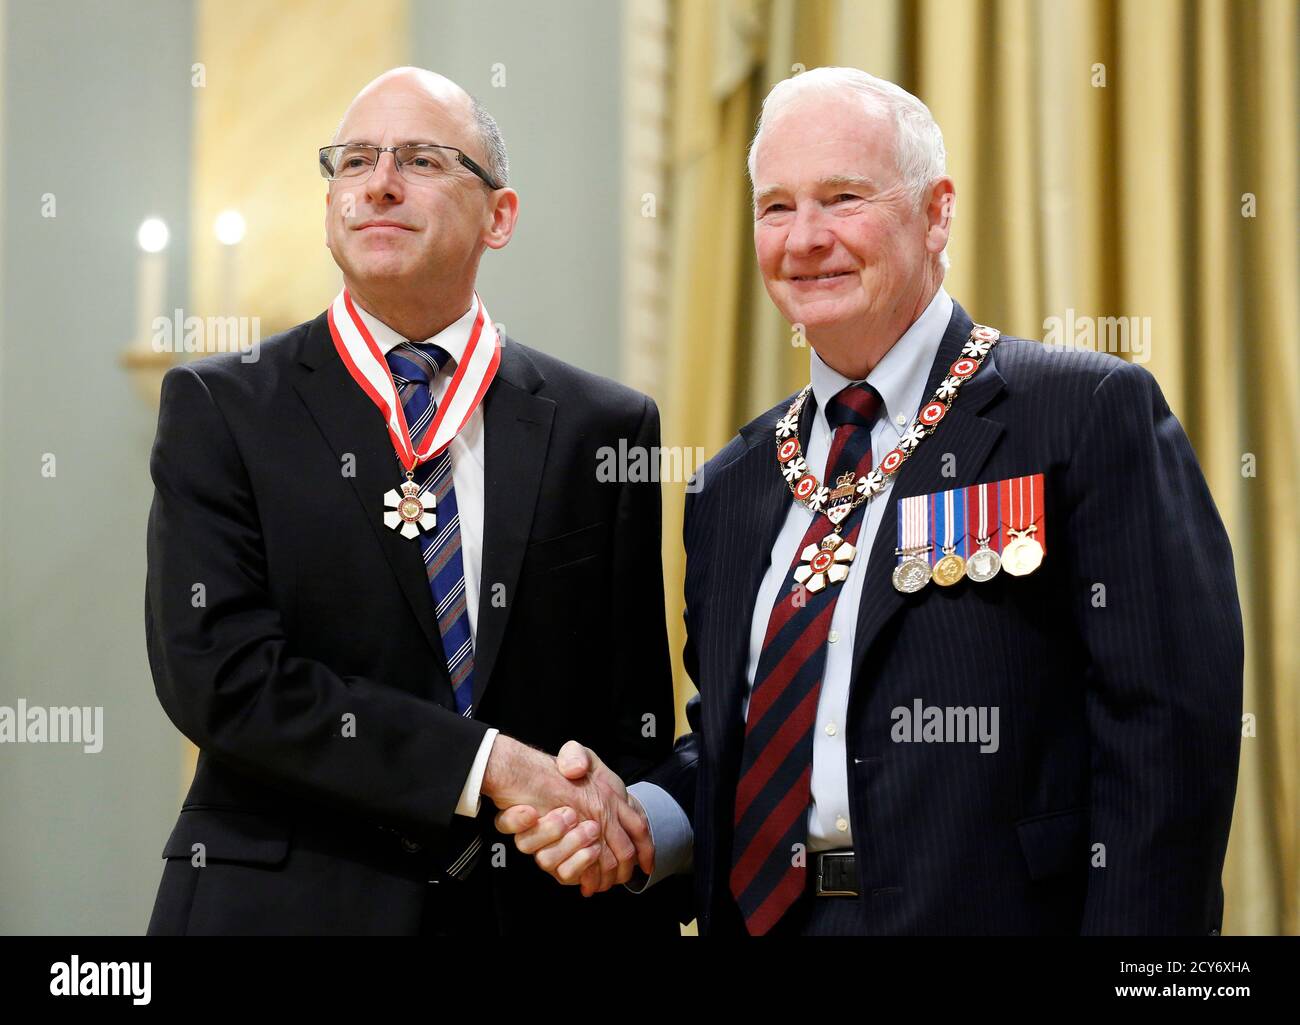 Genome scientist Thomas Hudson (L) poses with Governor General David  Johnston after being awarded the rank of Officer in the Order of Canada  during a ceremony at Rideau Hall in Ottawa November